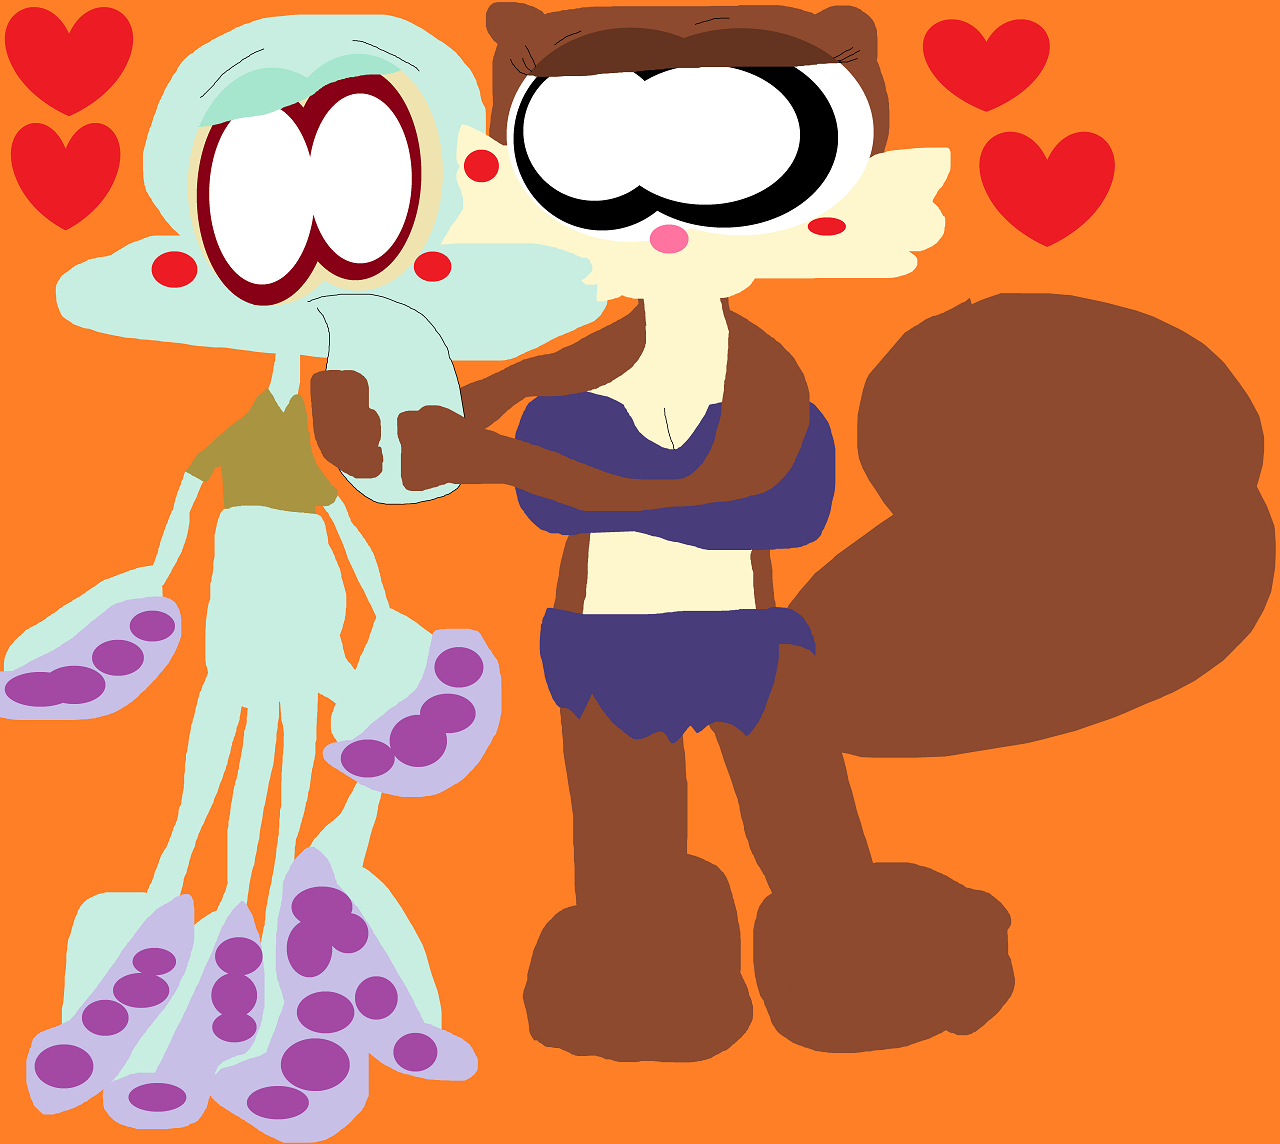 Squidward And Sandy Kissing With Hearts Around Them by Falconlobo